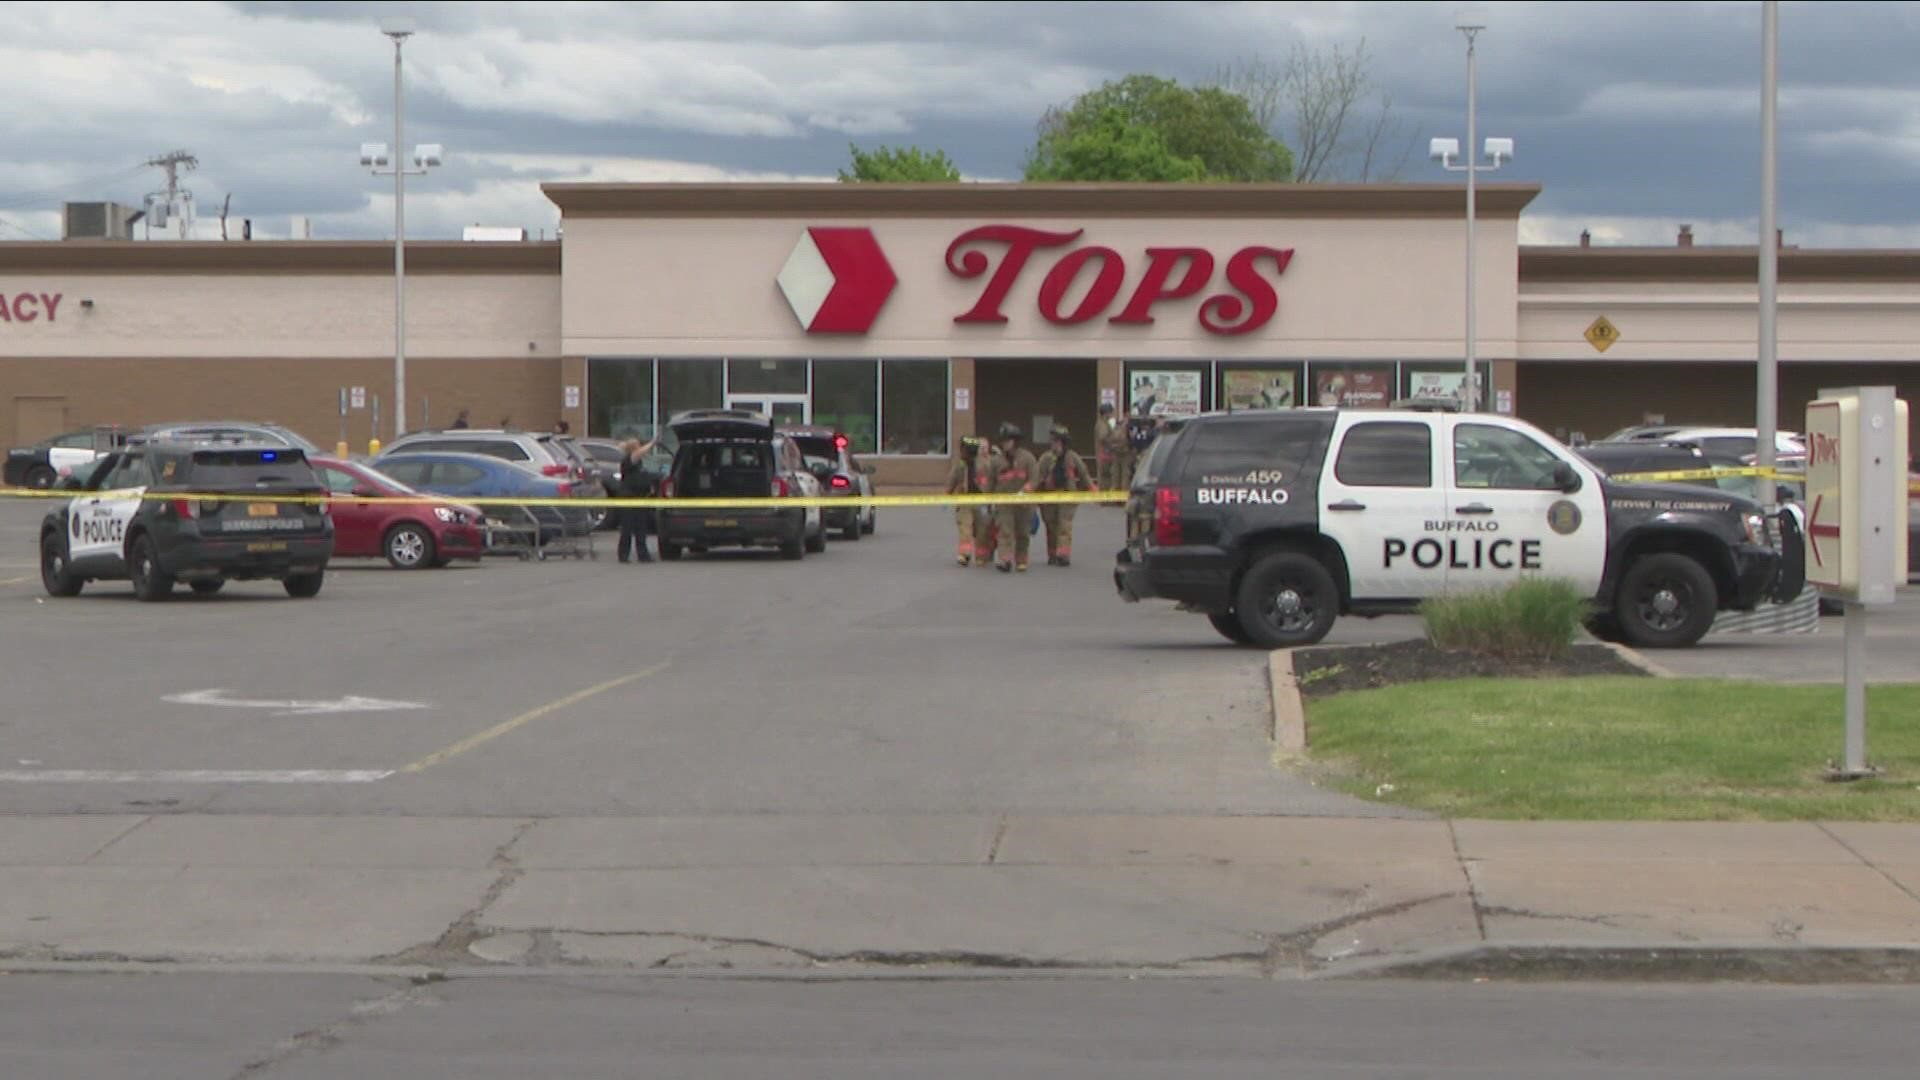 New charges against man accused of threatening businesses the day after the Tops shooting